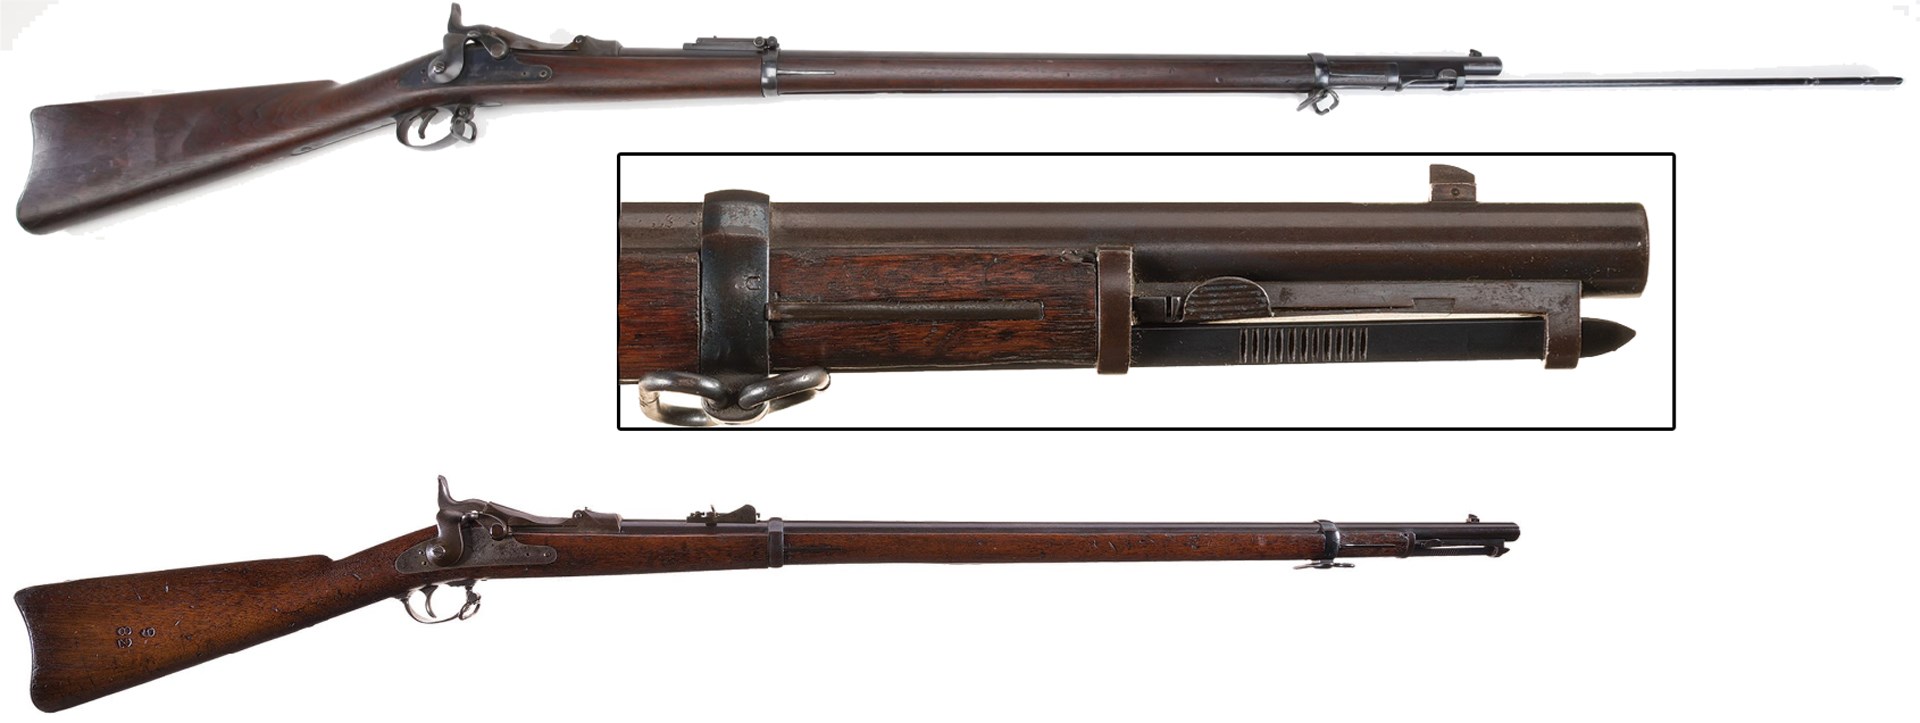 two rifles depicting bayonet rod within fore-end channel inset magnified detail of muzzle of trapdoor rifle with bayonet captive